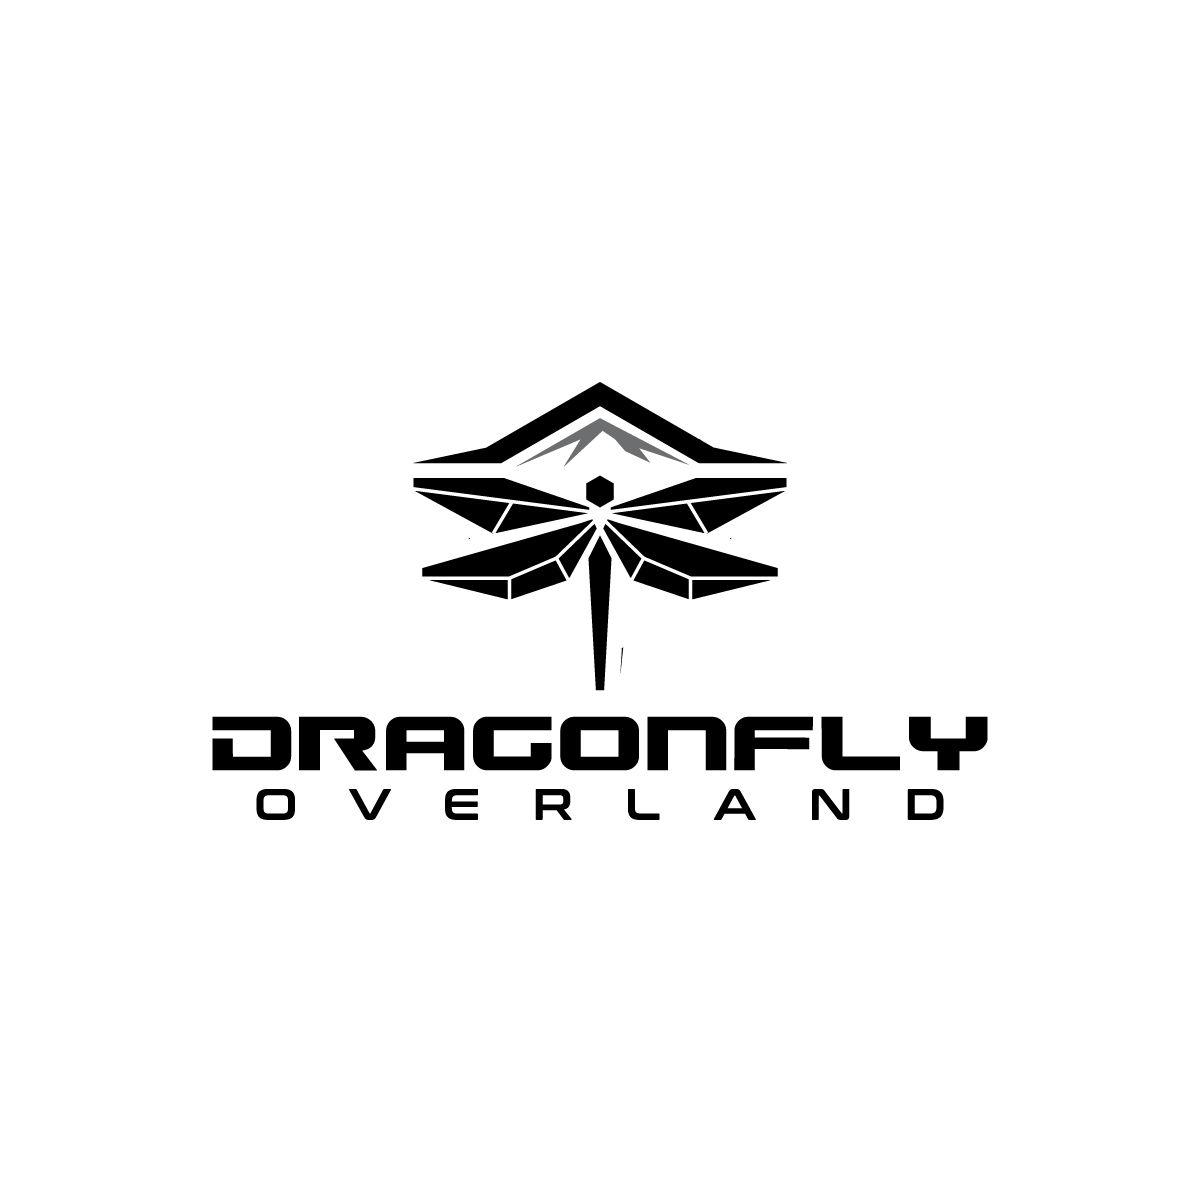 Overland Logo - Steampunk Esque Dragonfly Logo Needed For Dragonfly Overland